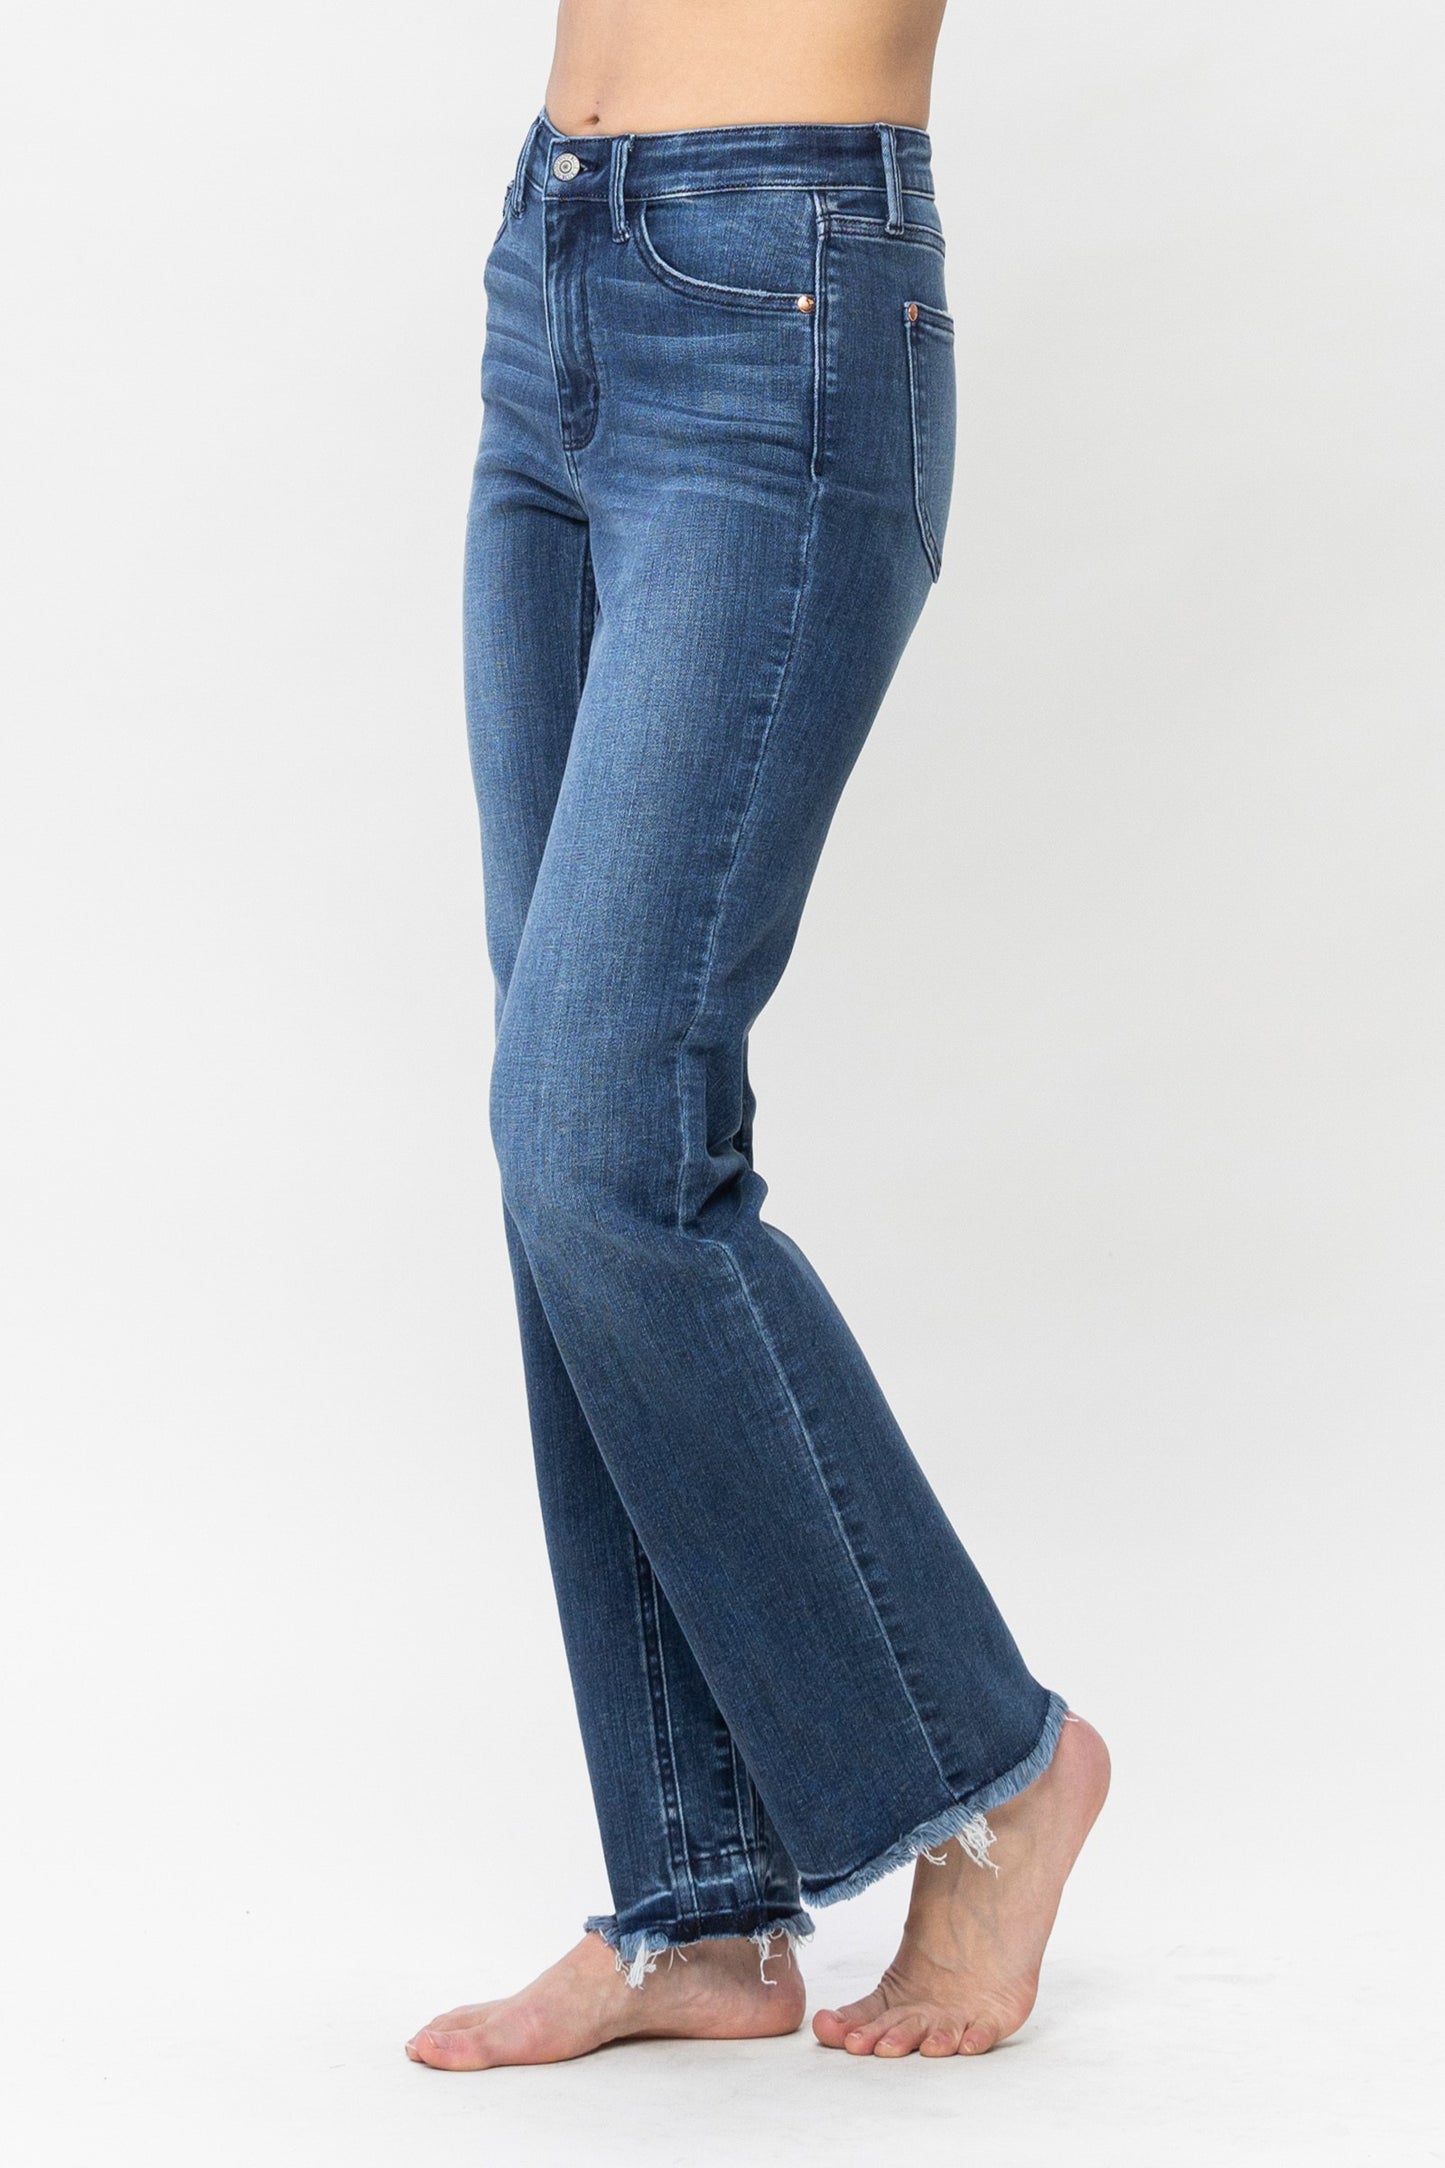 High Waist Inseam Detail & Release Hem Straight - Judy Blue  Straight leg jean Inseam Detail High Waist FRONT RISE: 11" INSEAM :32" 93% Cotton, 6% Poly, 1% Spandex Color: Blue These jeans from Judy Blue feature a high waist and inseam detail. The distressed bottoms offer a stylish look and the comfortable fit will make them your go-to for any event. With these jeans, you'll look fashionable and feel confident. Perfect amount of stretch and comfort.